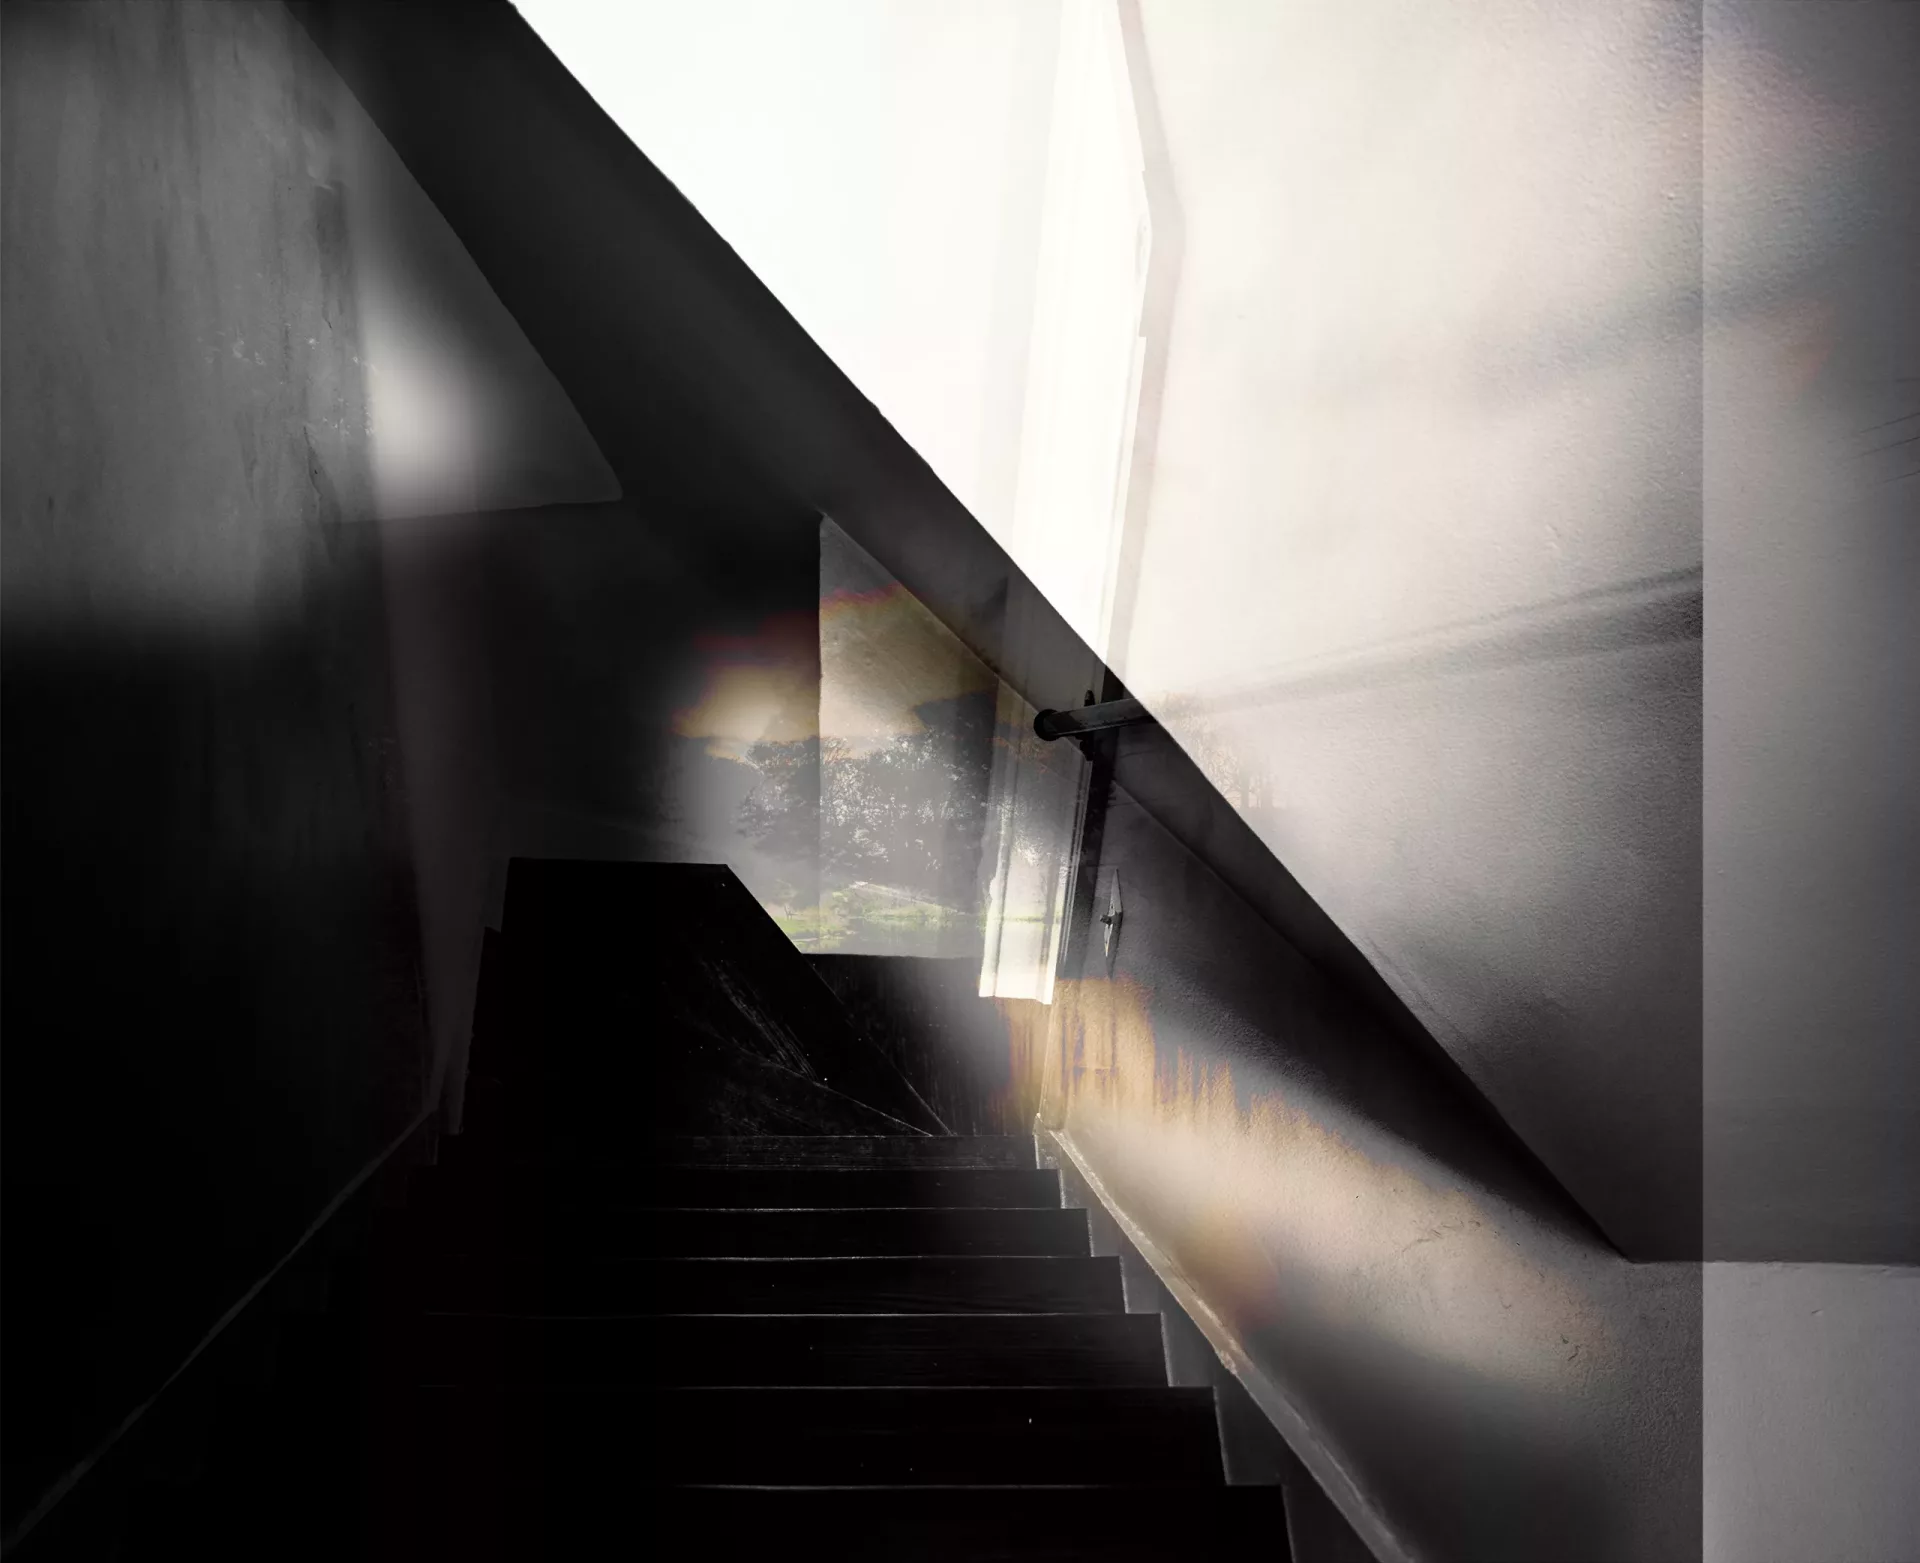 An abstract collage depicting a stairwell and the outdoors to illustrate uncertainty